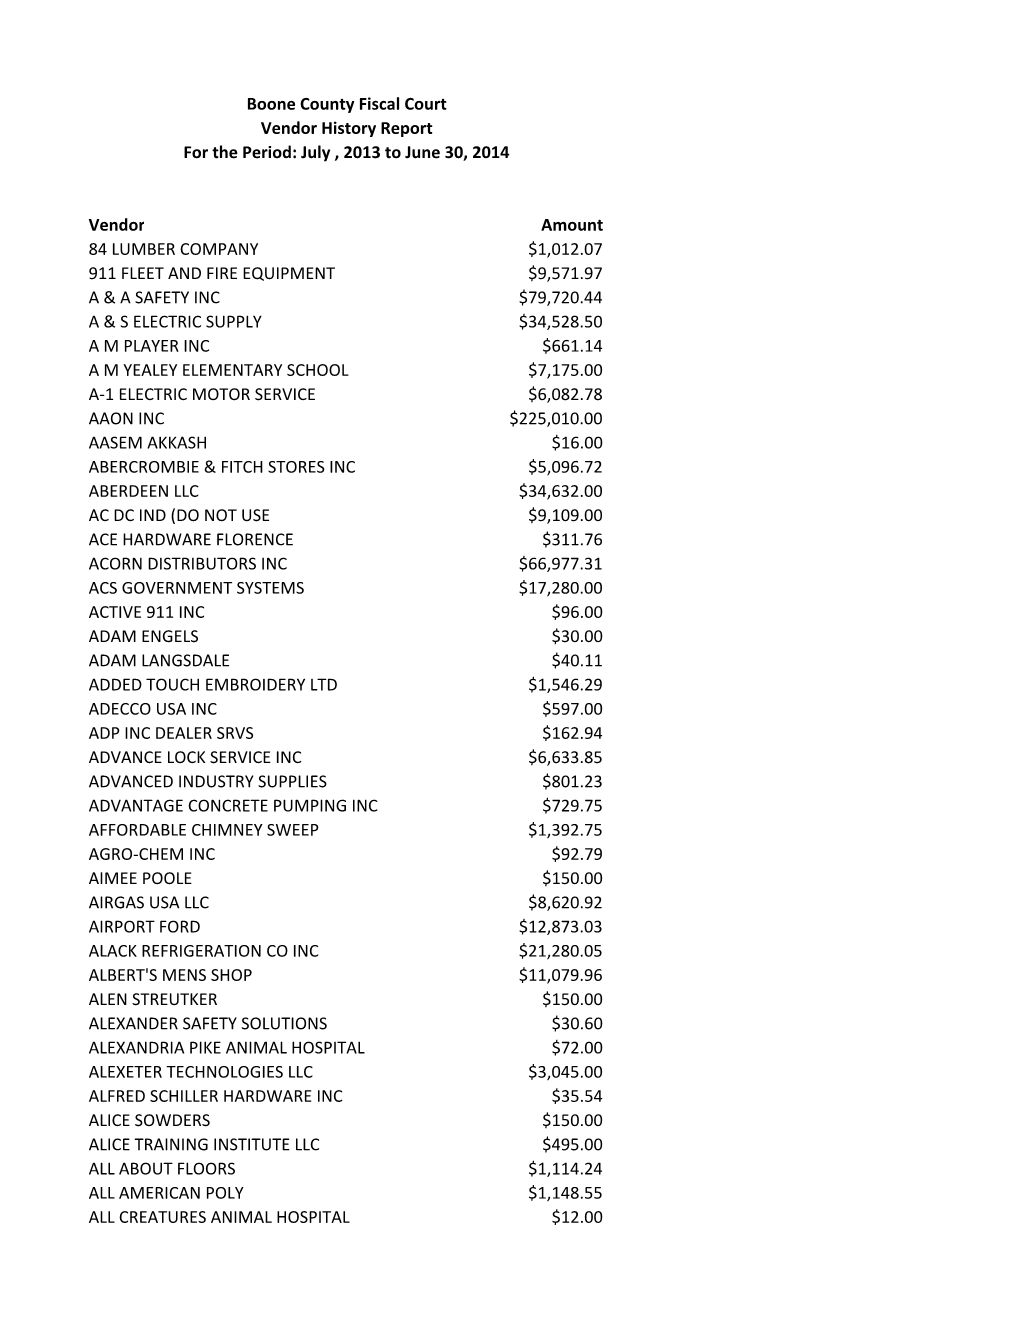 Boone County Fiscal Court Vendor History Report for the Period: July , 2013 to June 30, 2014